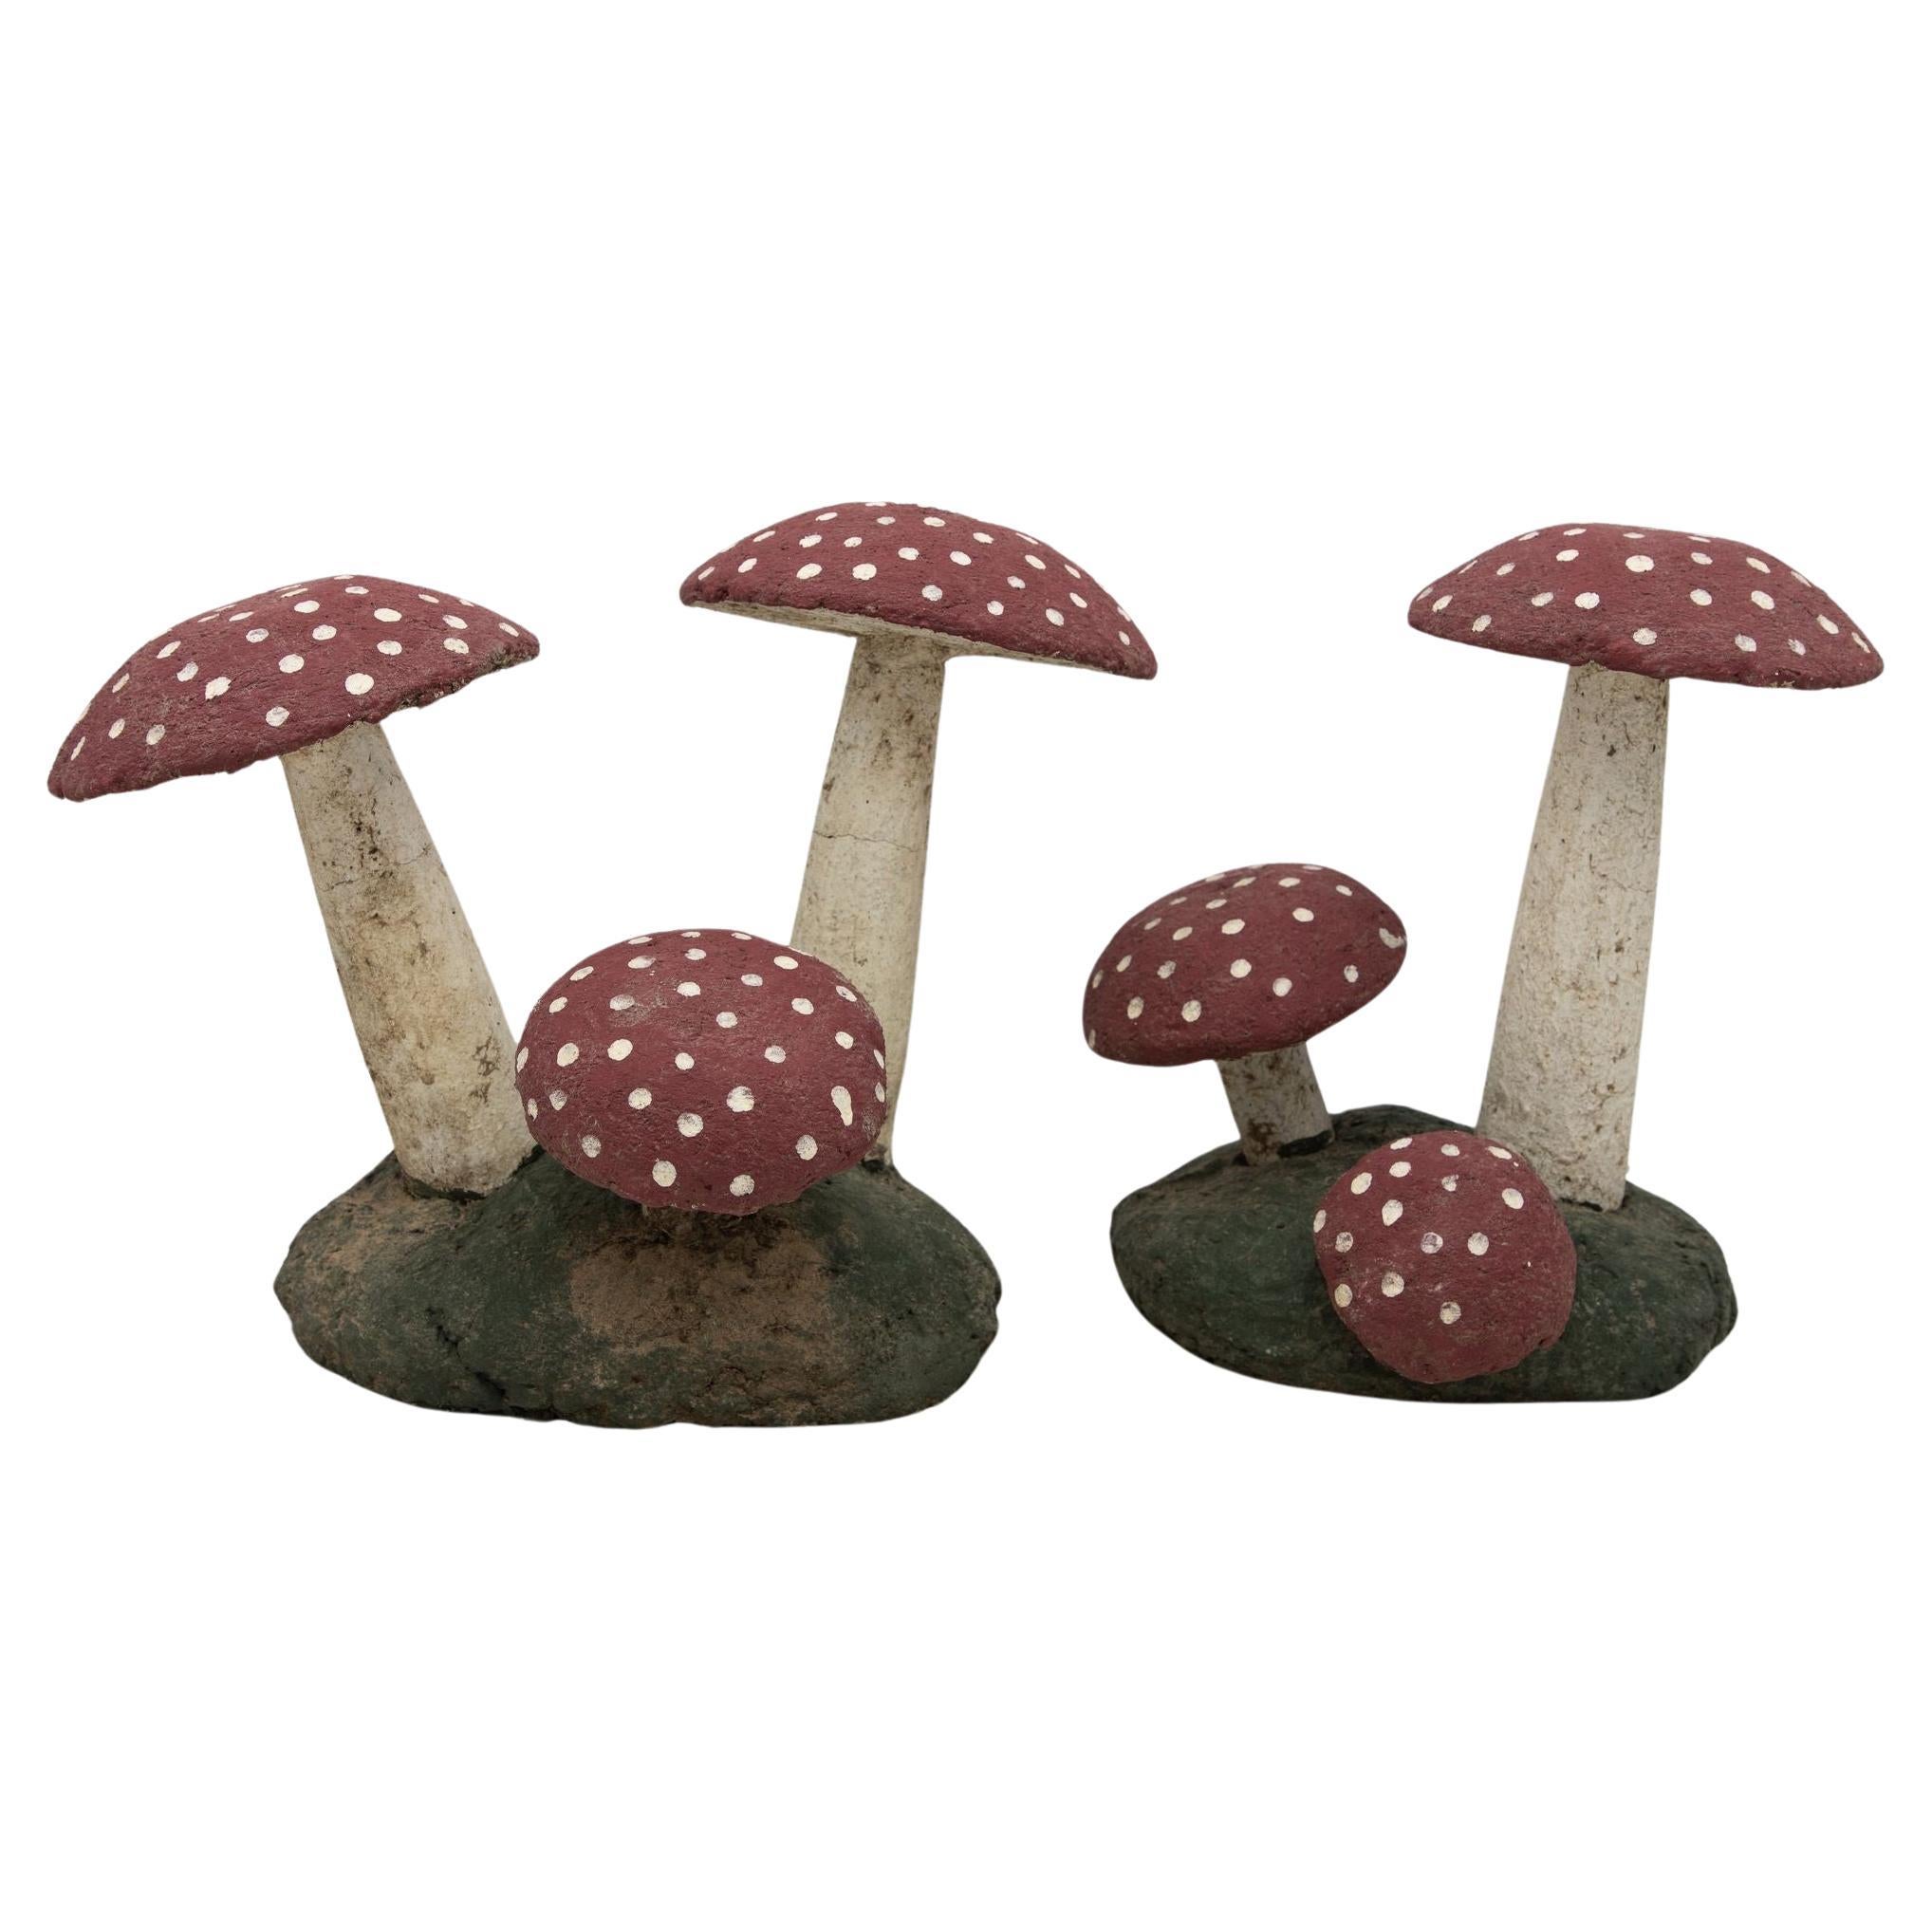 Pair Vintage Painted Stone Toadstools Mushrooms with Red Caps